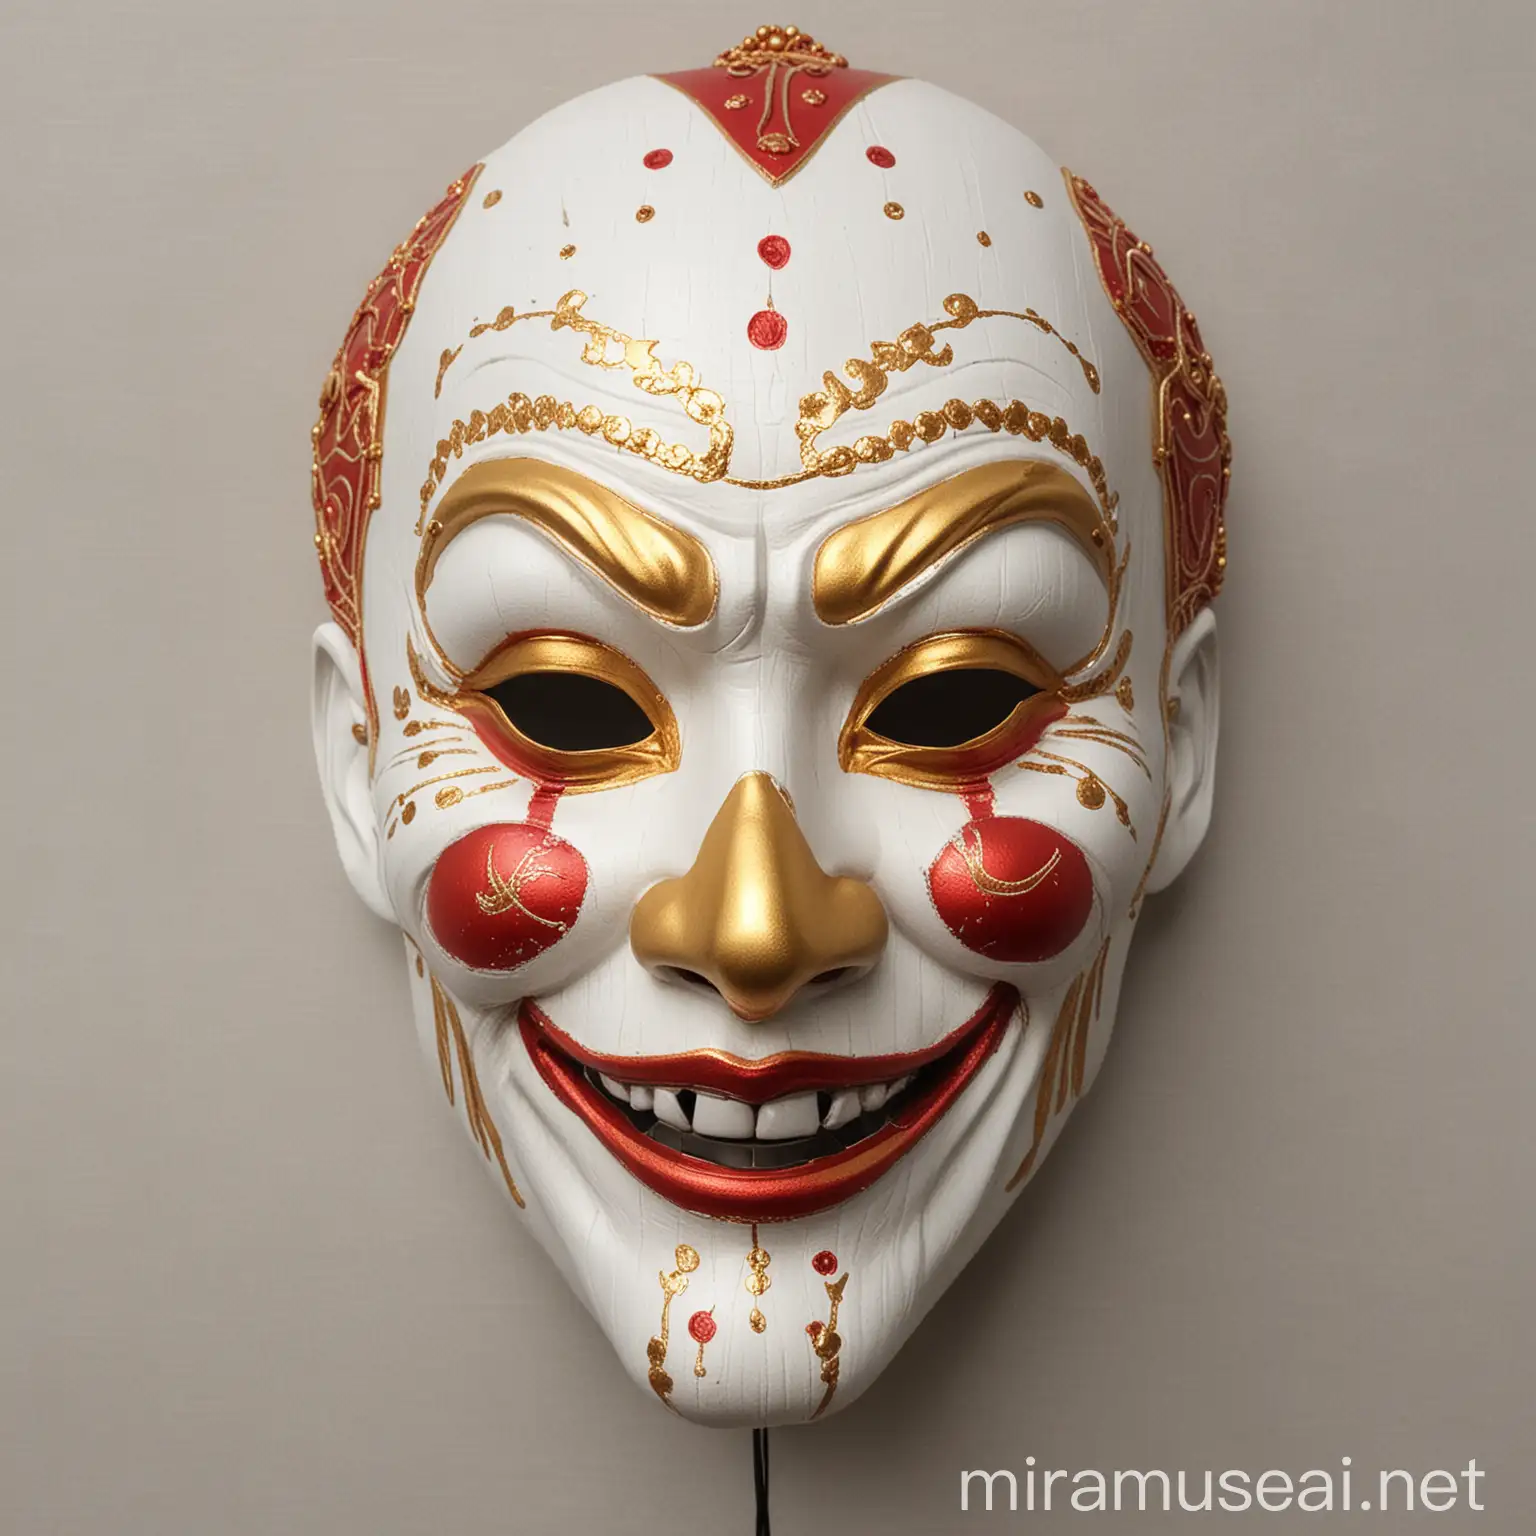 Japanese white clown man mask with cool gold and red ornaments